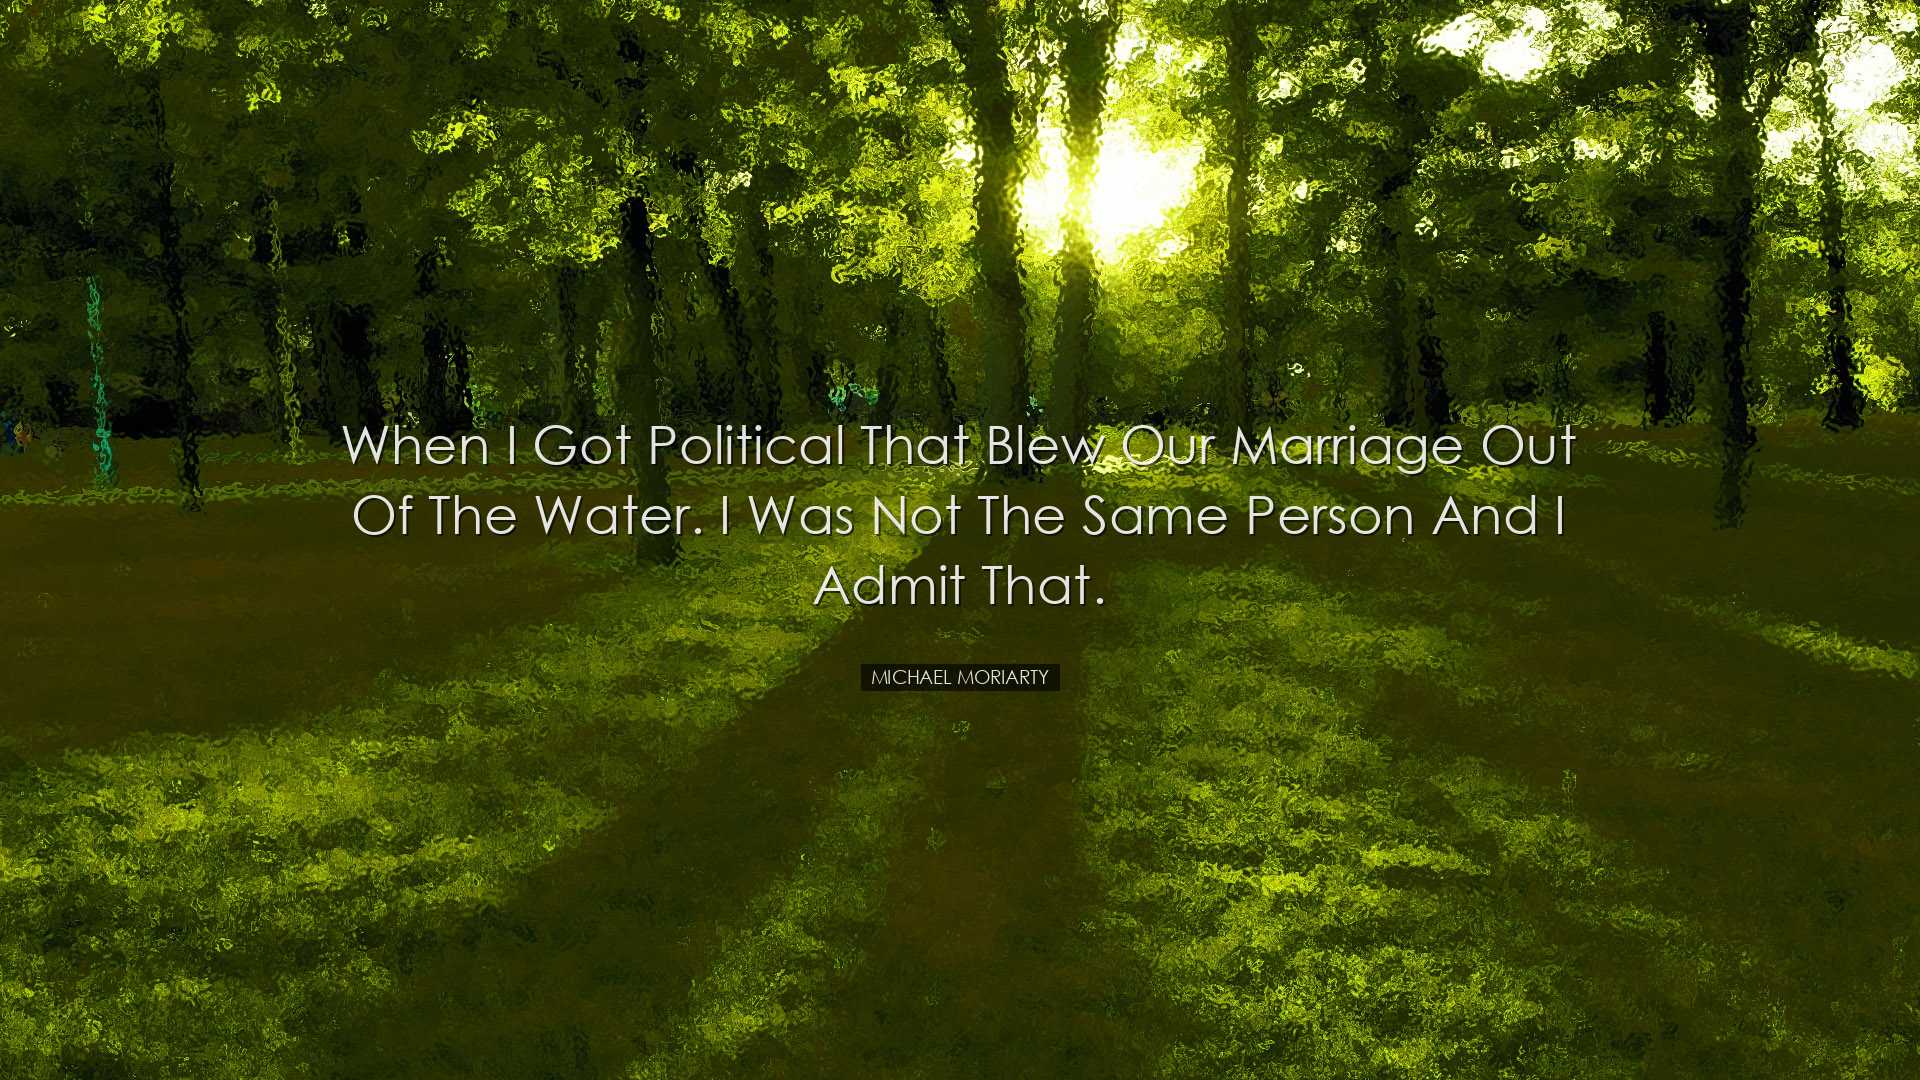 When I got political that blew our marriage out of the water. I wa